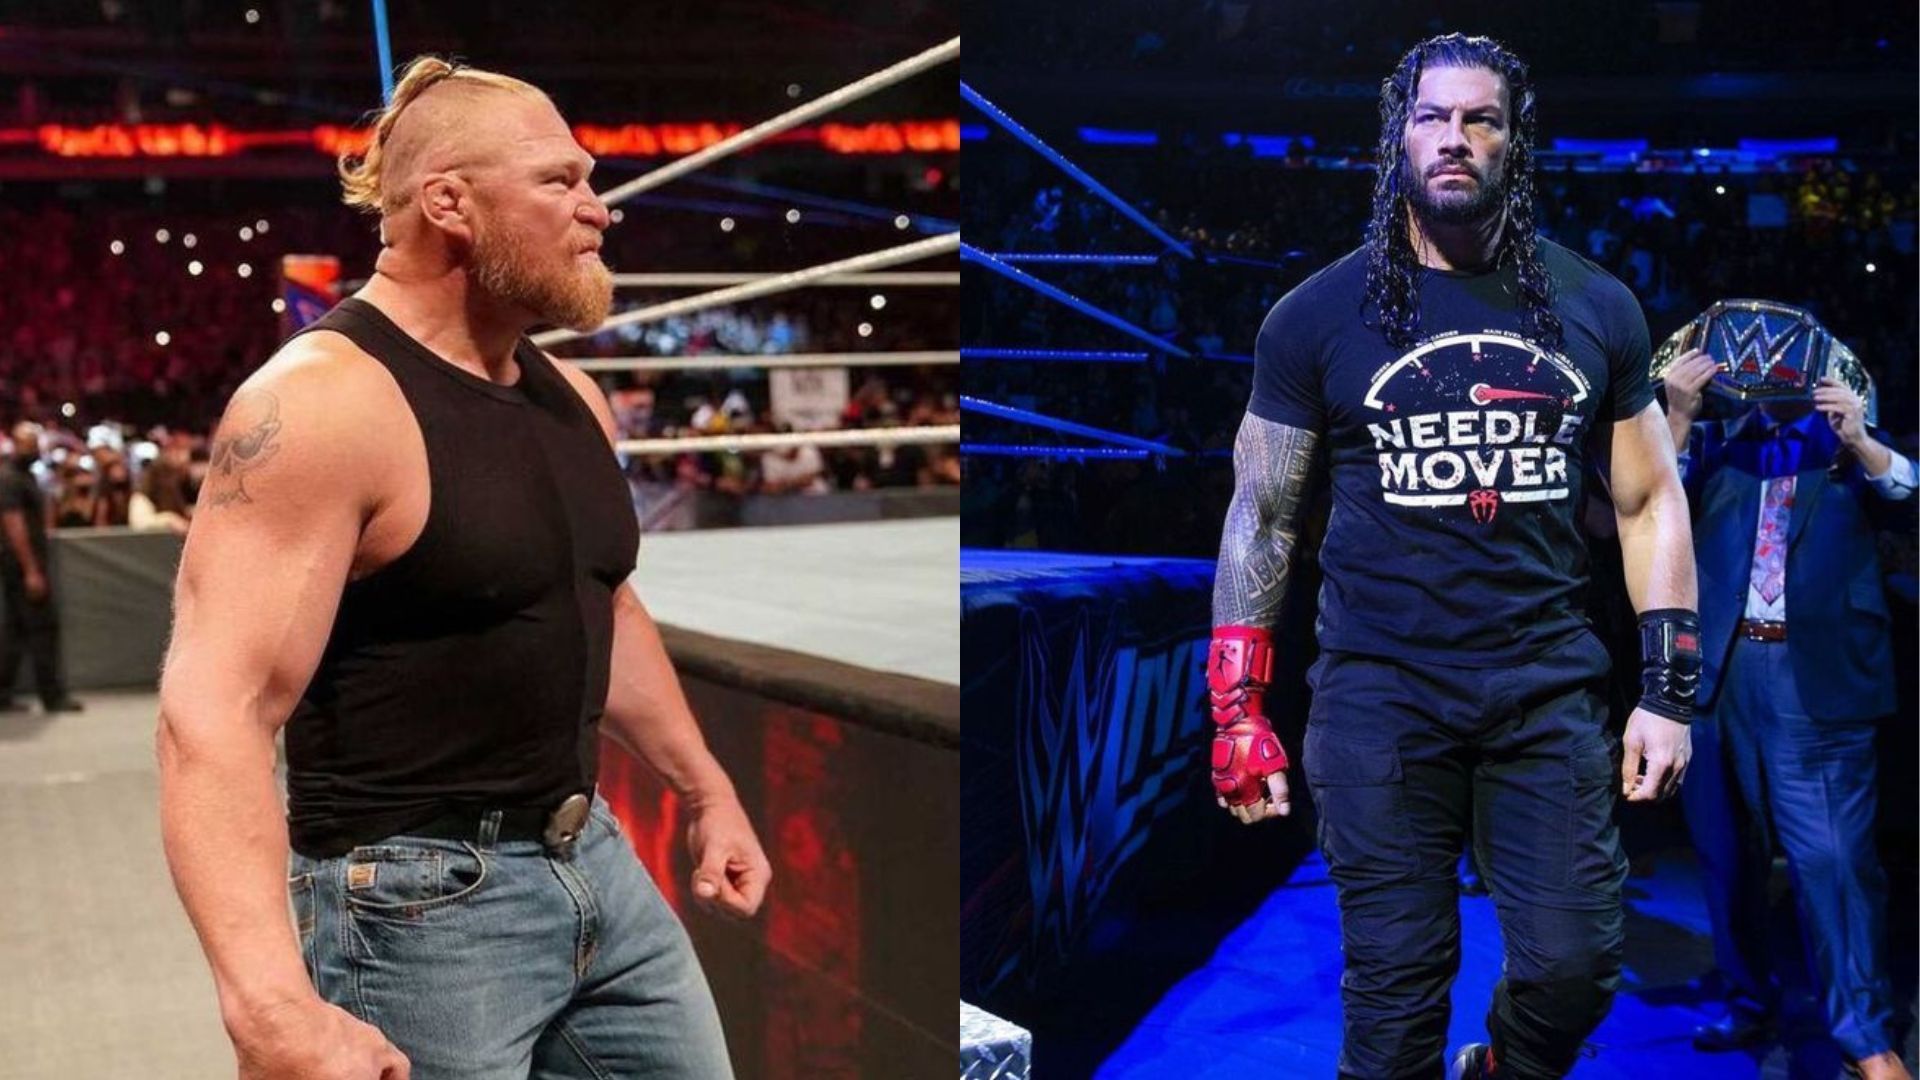 Could Roman Reigns once again feud with a former Universal Champion?